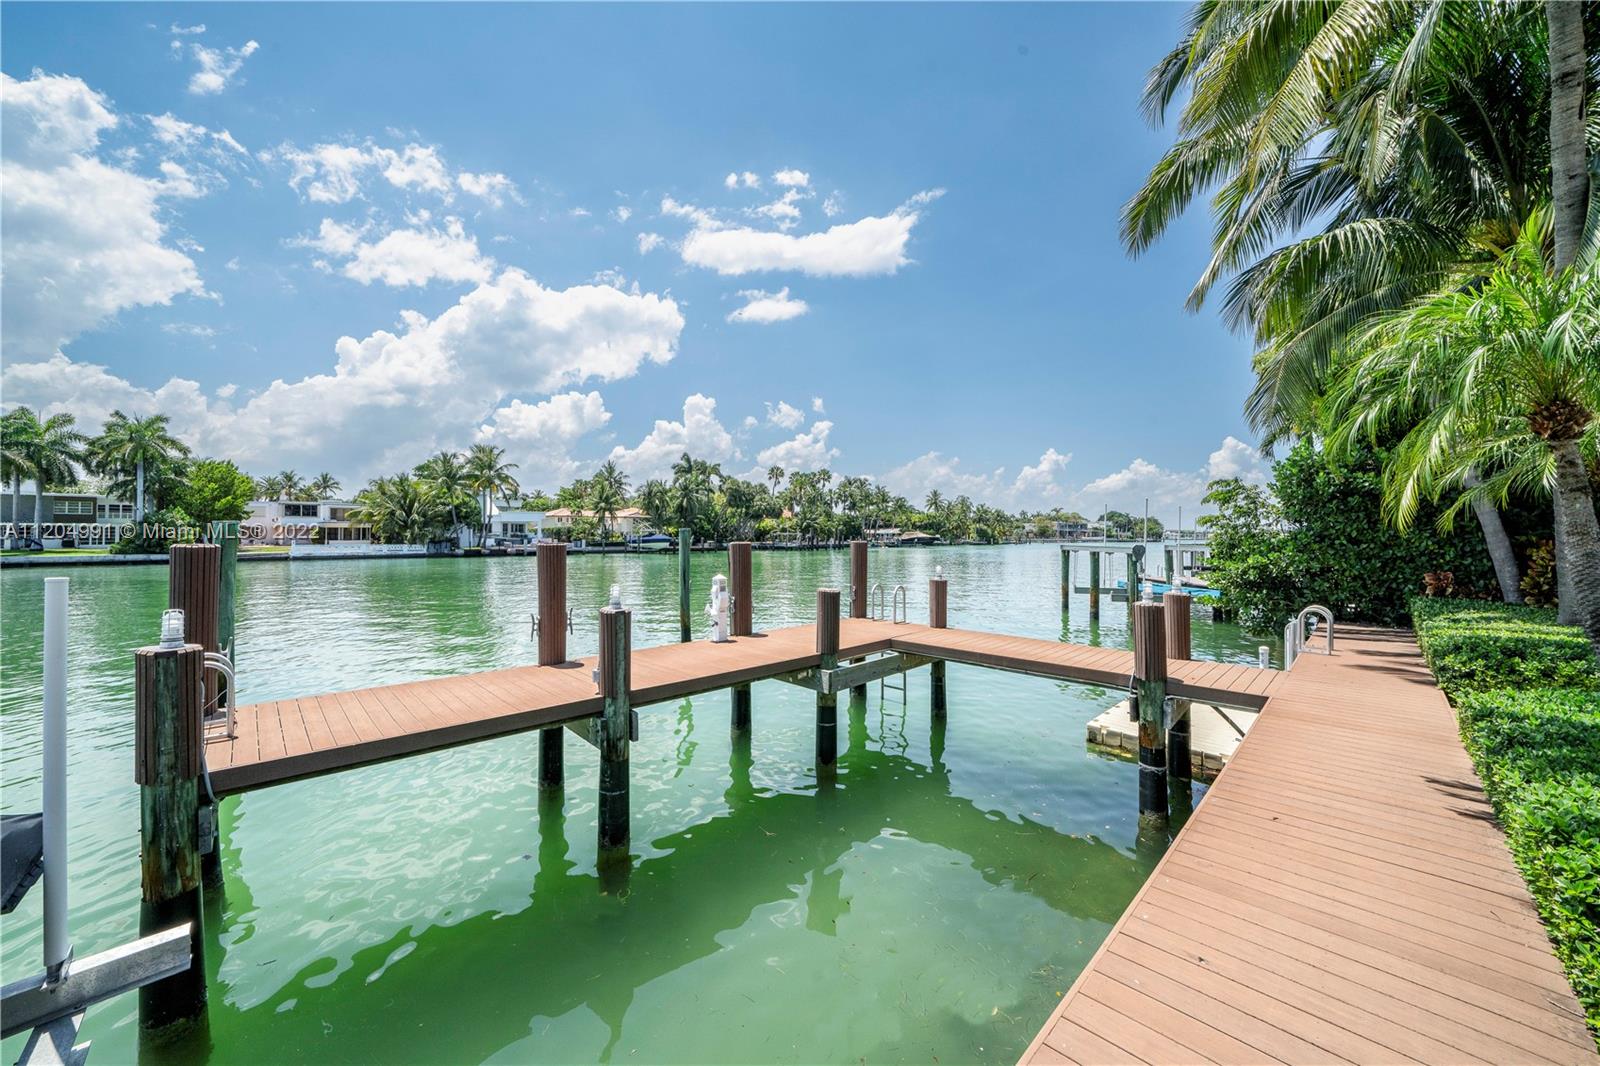 One of Miami's most sought-after waterfront islands! Sunsets & sweeping wide water views from this west facing modern Mediterranean home on private gated Allison Island. Newly renovated, move-in ready, 5,600SF w/ 6BD, 6.5BA on a 16,200SF lot w/ 75FT of yacht friendly deep water & direct bay/ocean access. Great floorplan w/5BD on 2nd floor all w/en-suite baths, walk-in closets & terraces. 3 sitting rooms, mud room, gym, 2-car garage, fully equipped kitchen w/double islands, wine fridge, Miele appliances, laundry & separate pantry w/maids quarters. Crestron system w/built in speakers, updated dock & jet ski lift. Generous enclosed front yard & expansive backyard w/ an oversized mosaic tiled saltwater heated pool w/spa, covered summer kitchen & mature landscaping to ensure ultimate privacy.